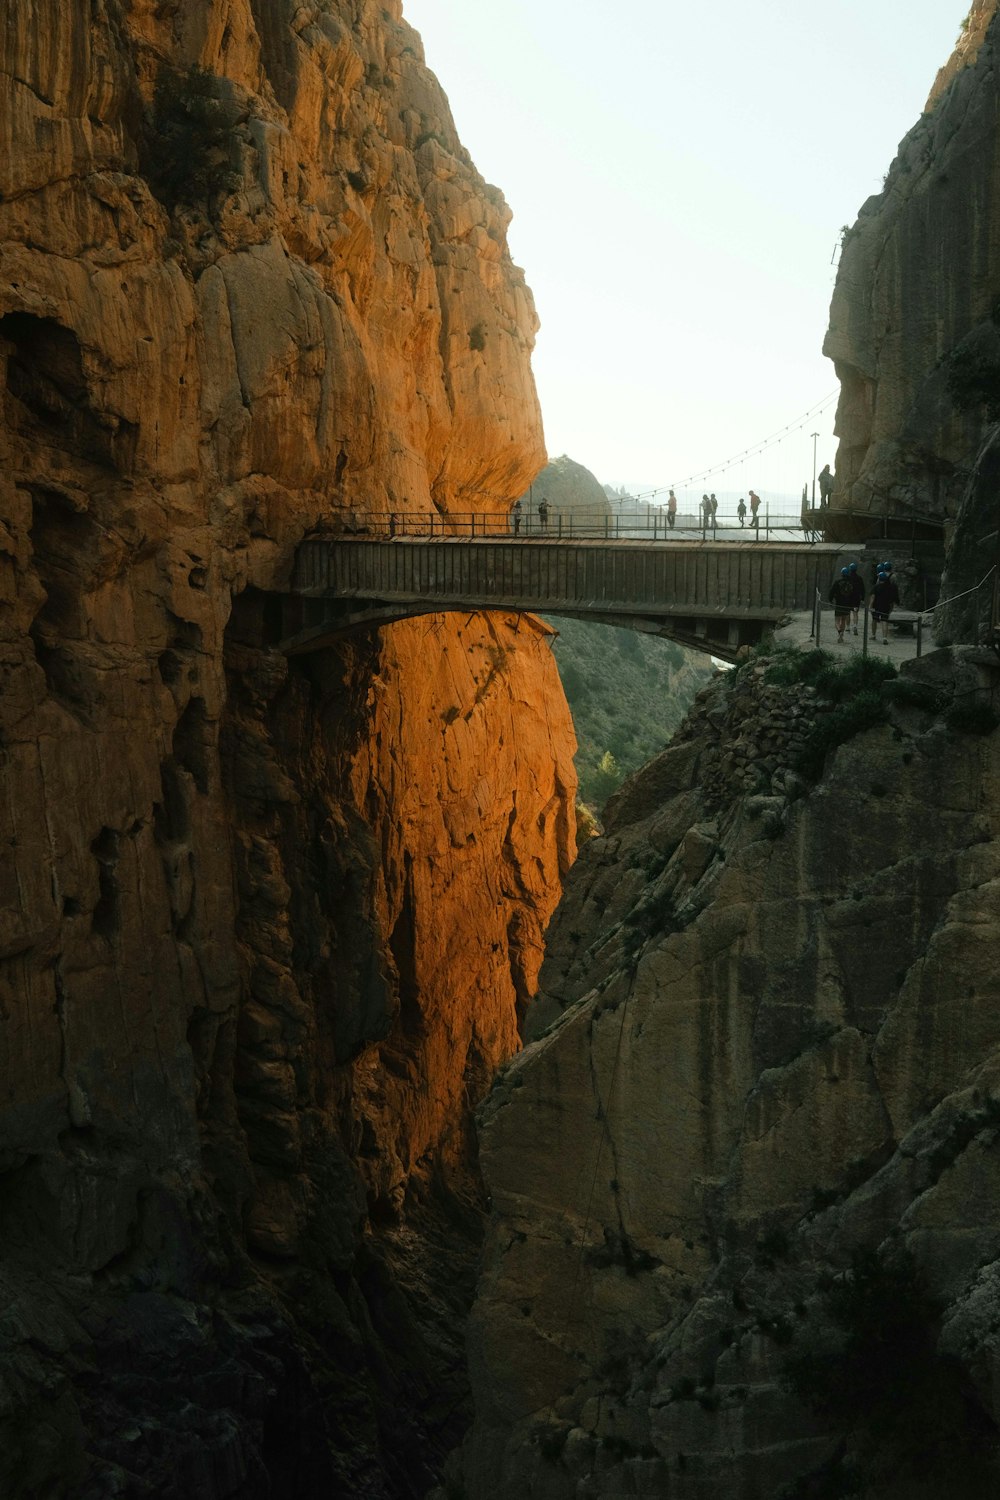 a bridge over a canyon with people walking on it